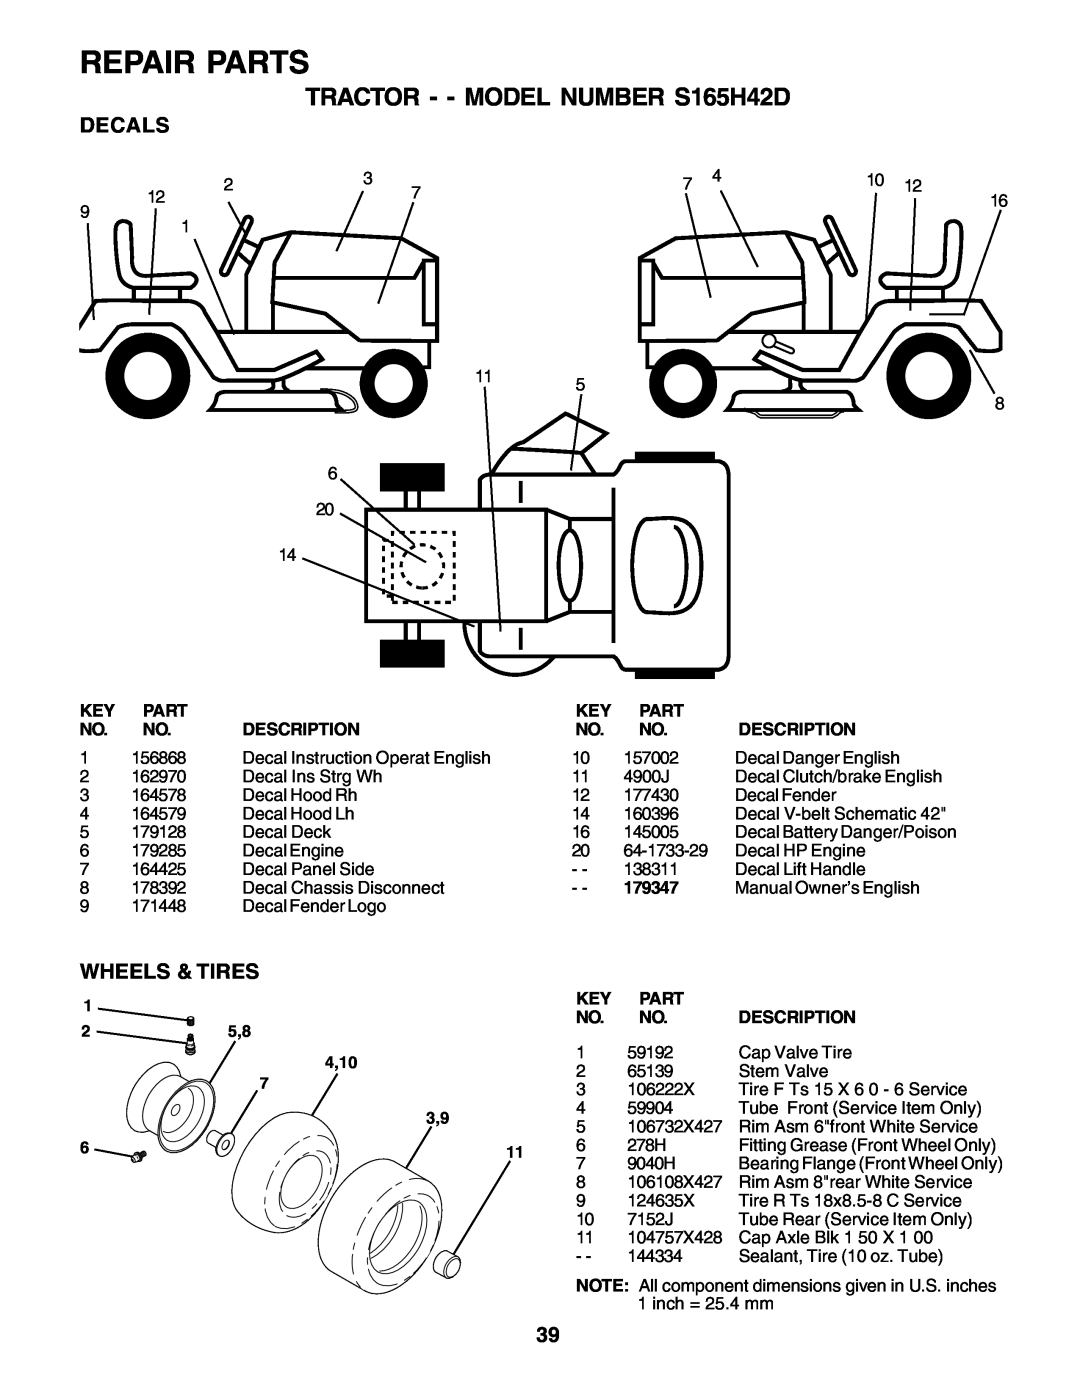 Weed Eater owner manual Repair Parts, TRACTOR - - MODEL NUMBER S165H42D, Decals, Wheels & Tires, 4,10 